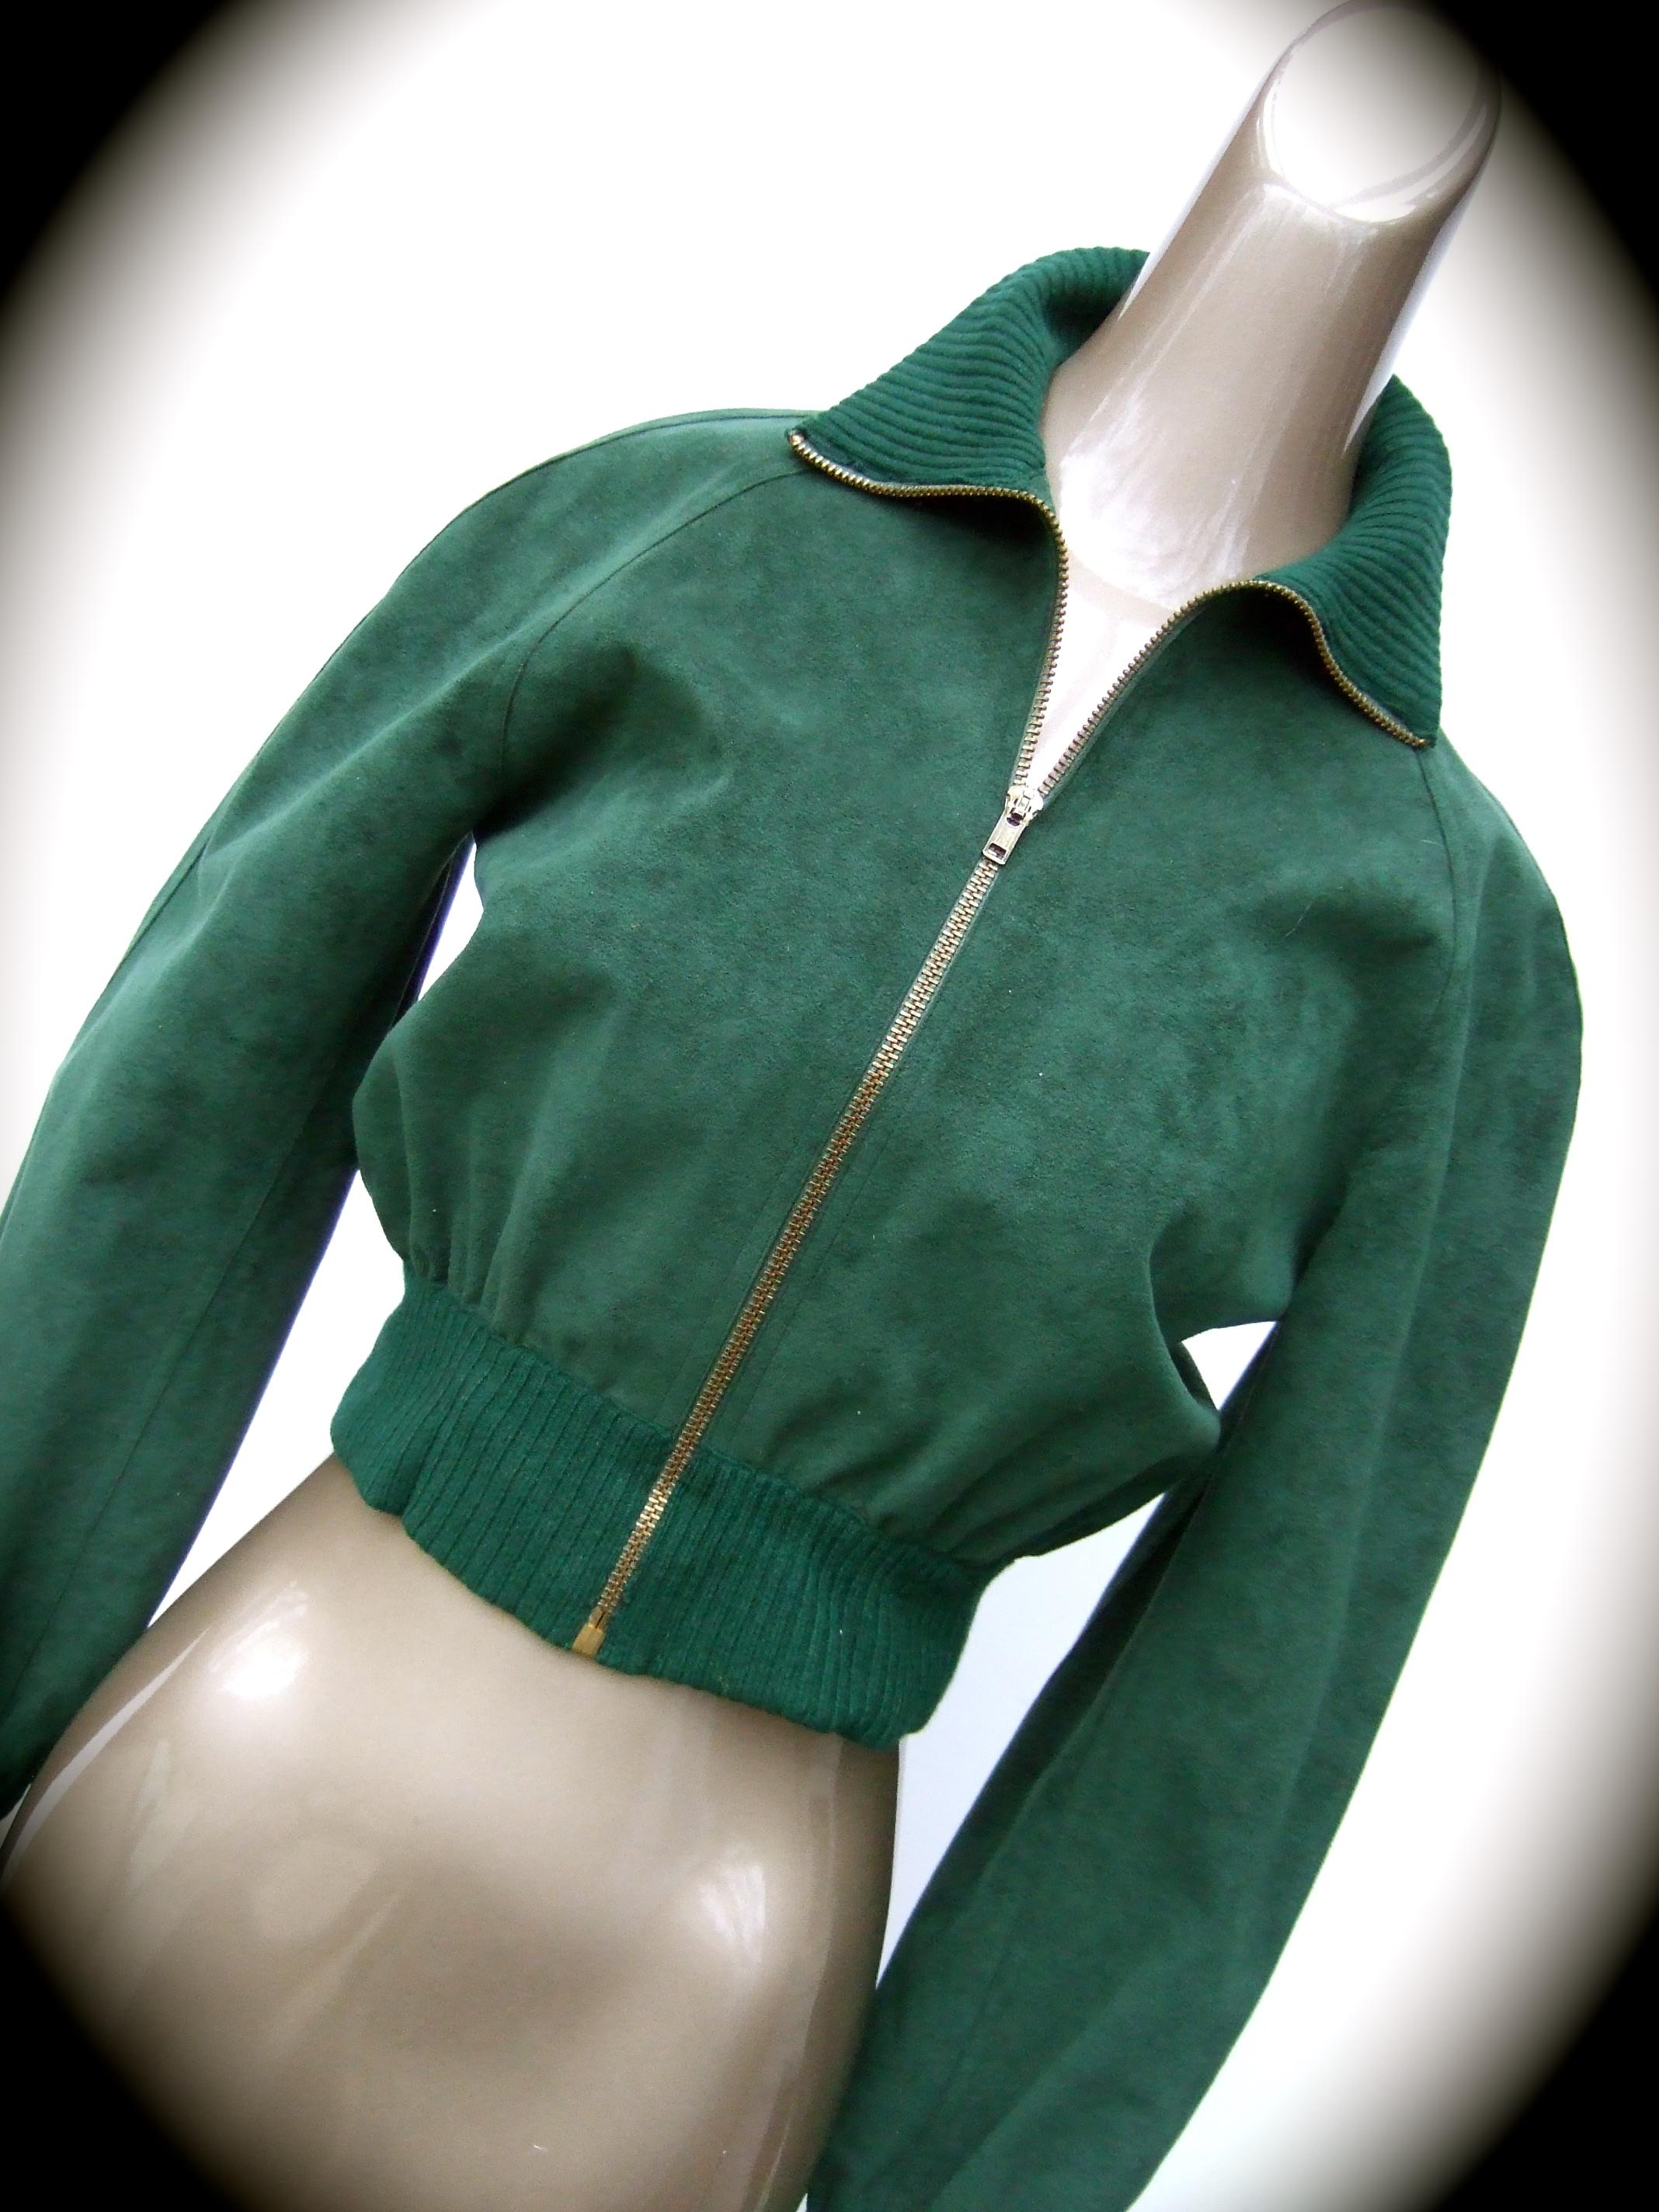 Halston Iconic Ultra Feather Faux Suede Cropped Zippered Jacket c 1970s Petite  In Good Condition For Sale In University City, MO